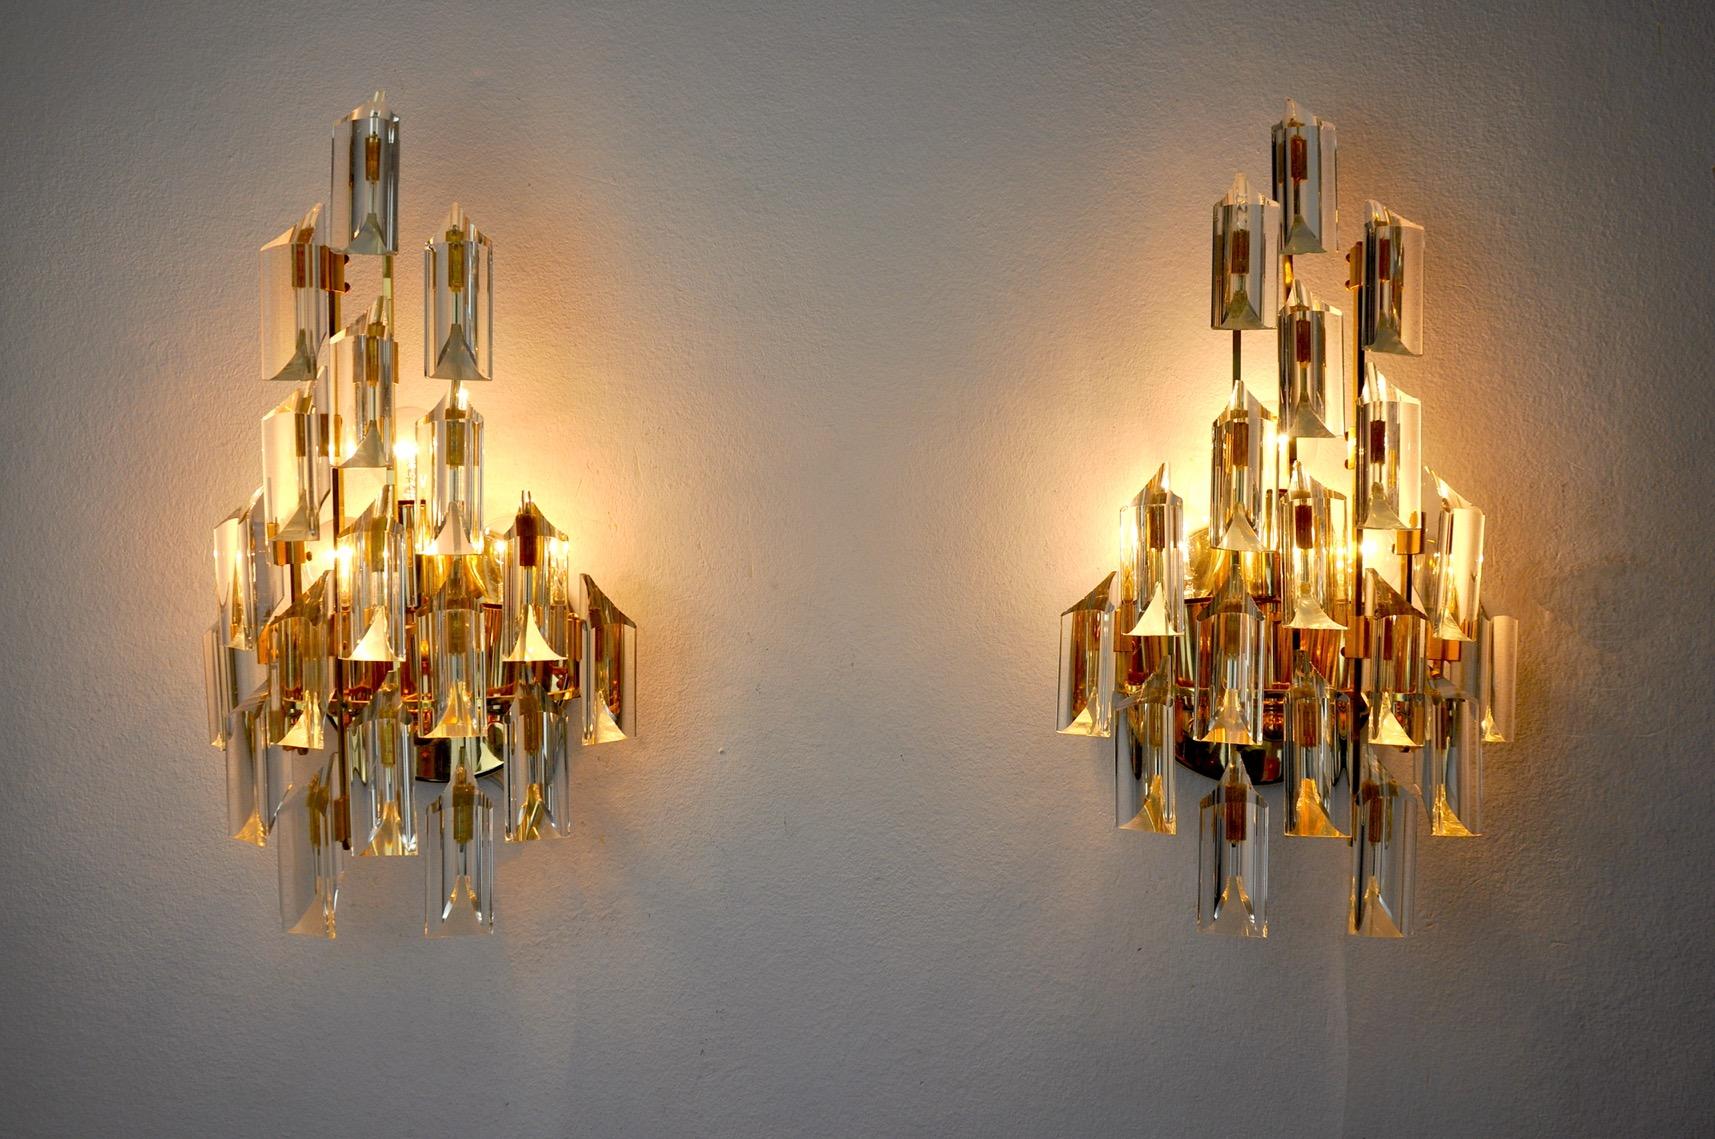 Very beautiful and rare pair of oscar torlasco wall lamp produced in italy in the 70s.

Cut glass called triedri and gilded metal structure.

Unique object that will illuminate wonderfully and bring a real design touch to your